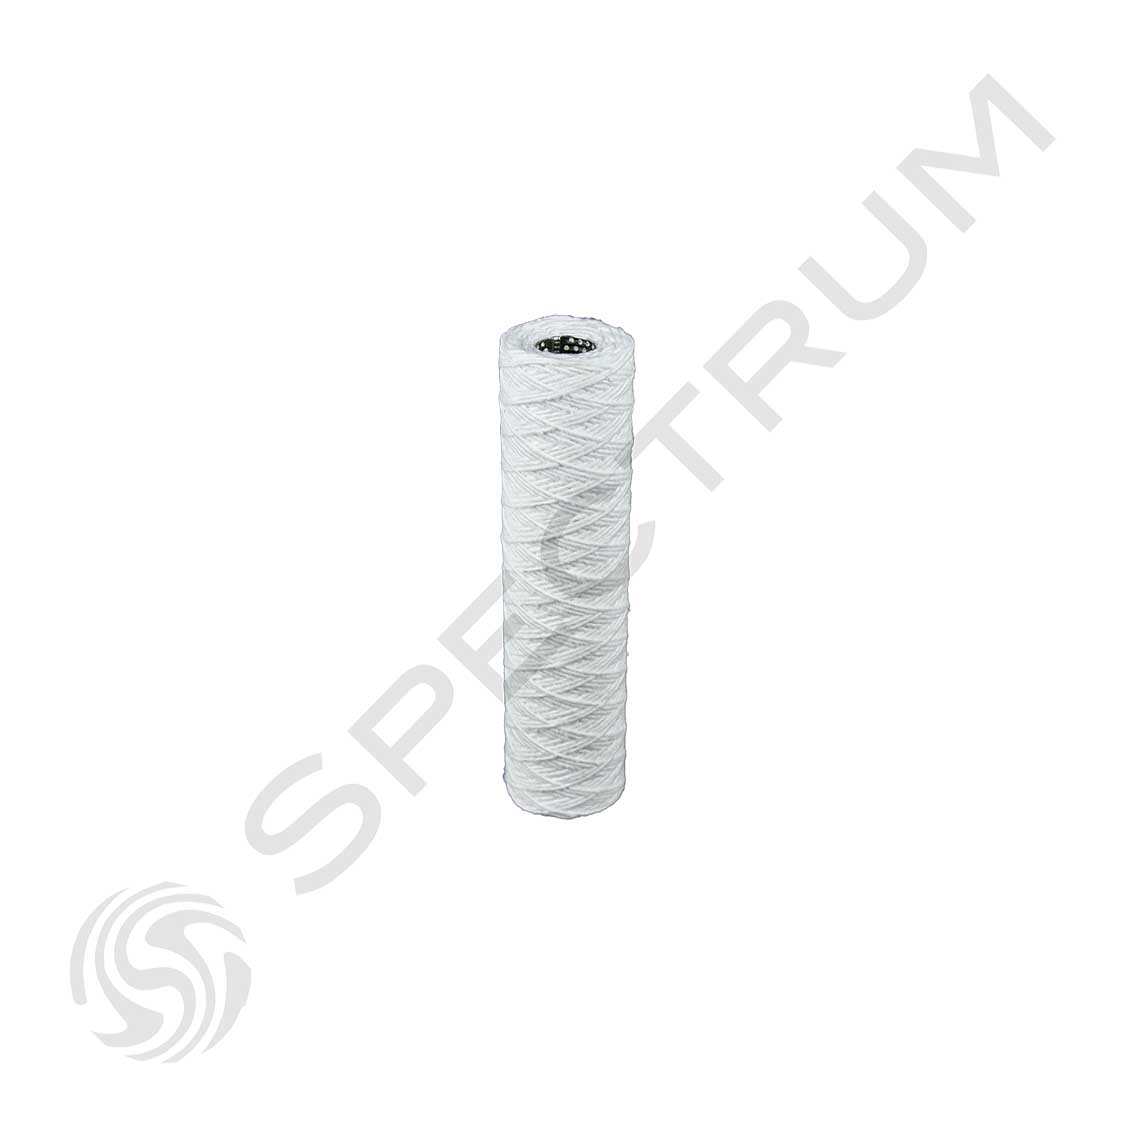 SPECTRUM SWC-25-10 Wound Cotton Filter Cartridge with Stainless Steel Core  25 micron  10